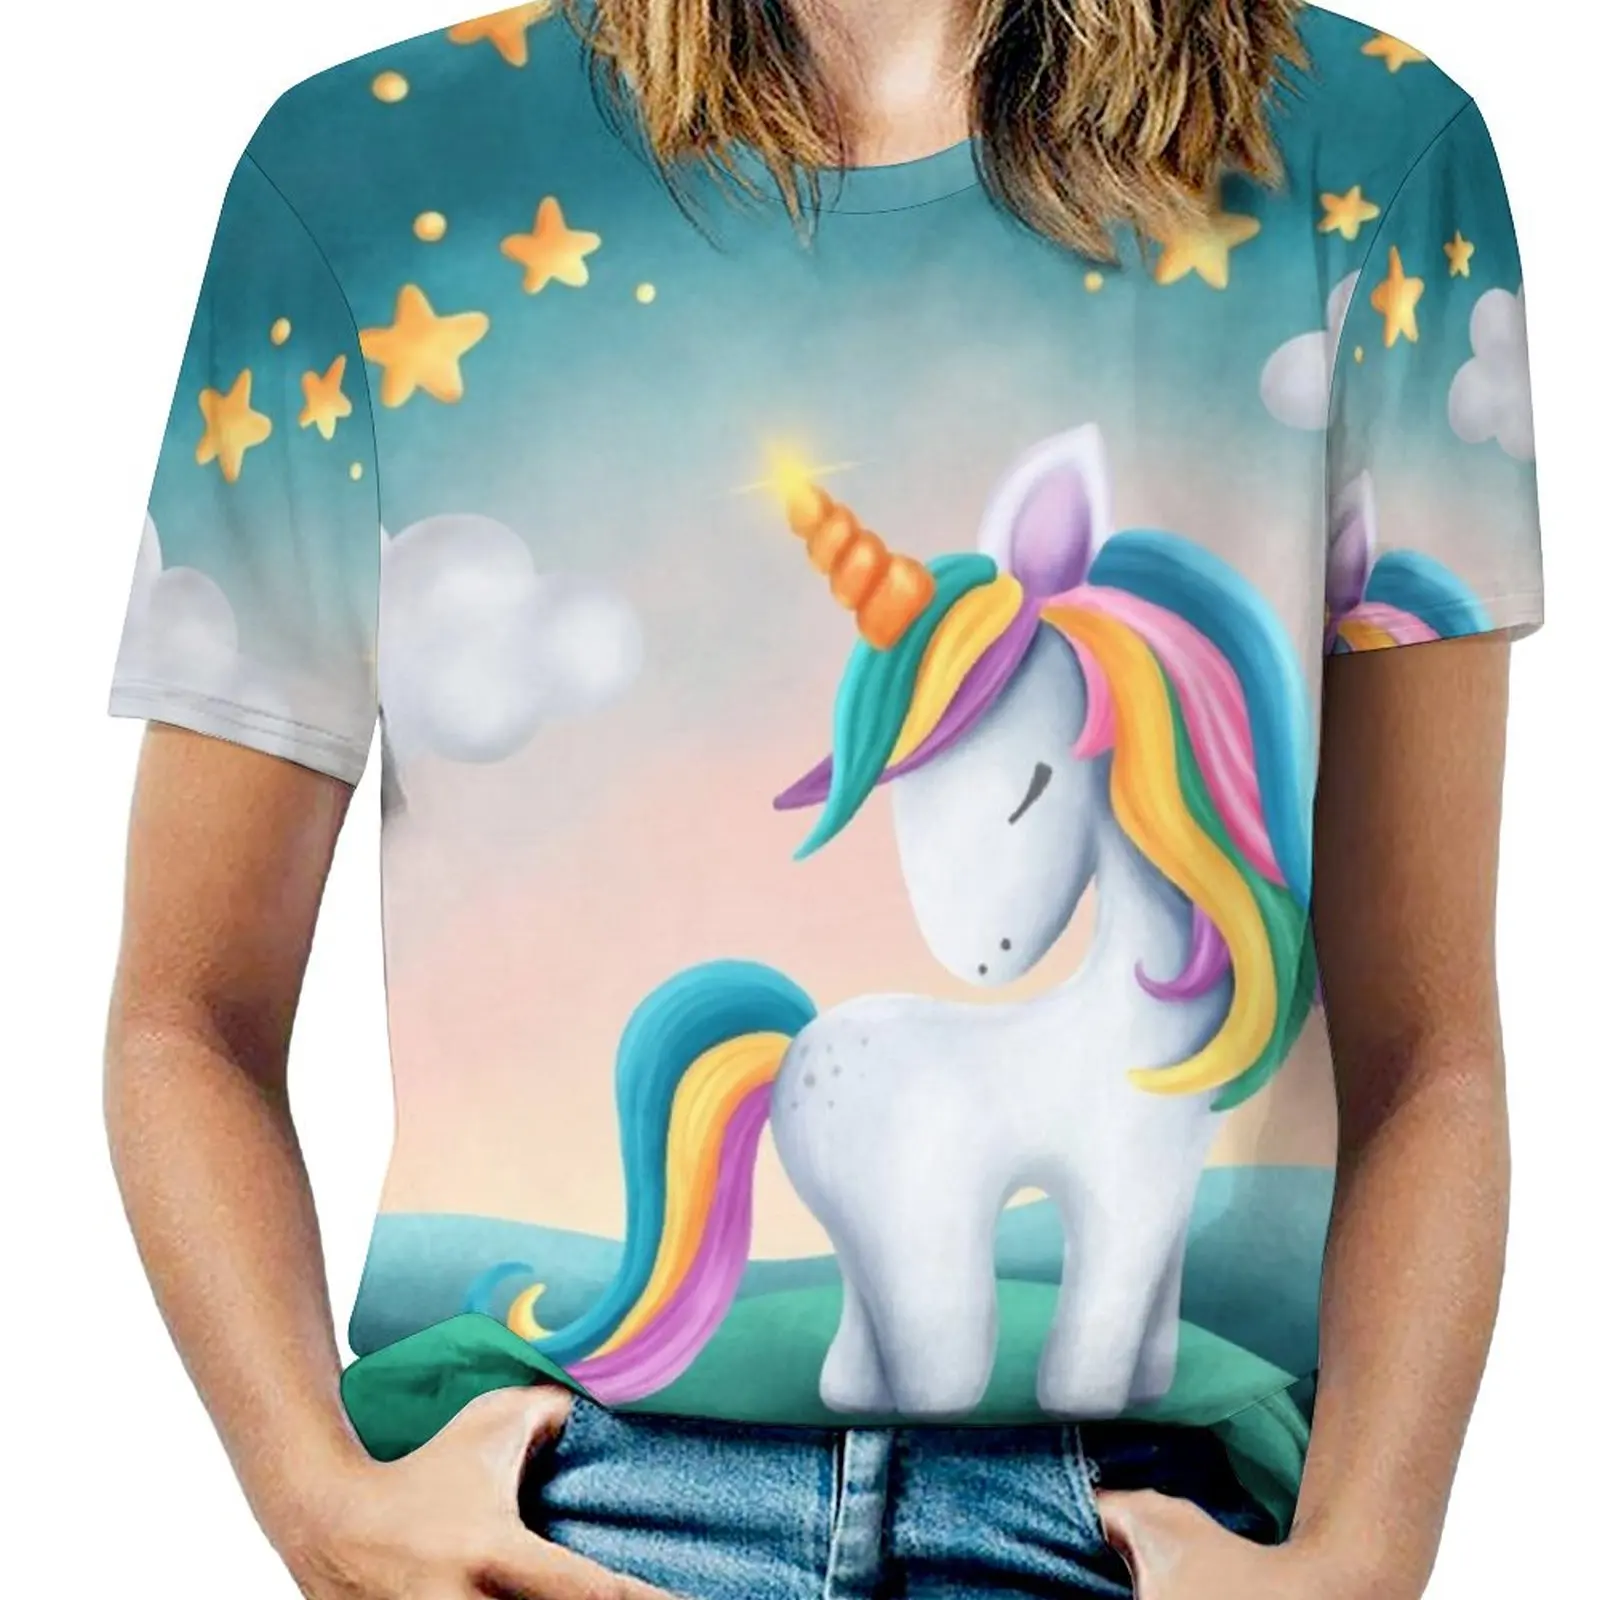 

Wall Mural Little Cute Unicorn T-shirt Fresh Tees Graphic Aactivity Competition Sports Funny Novelty Eur Size